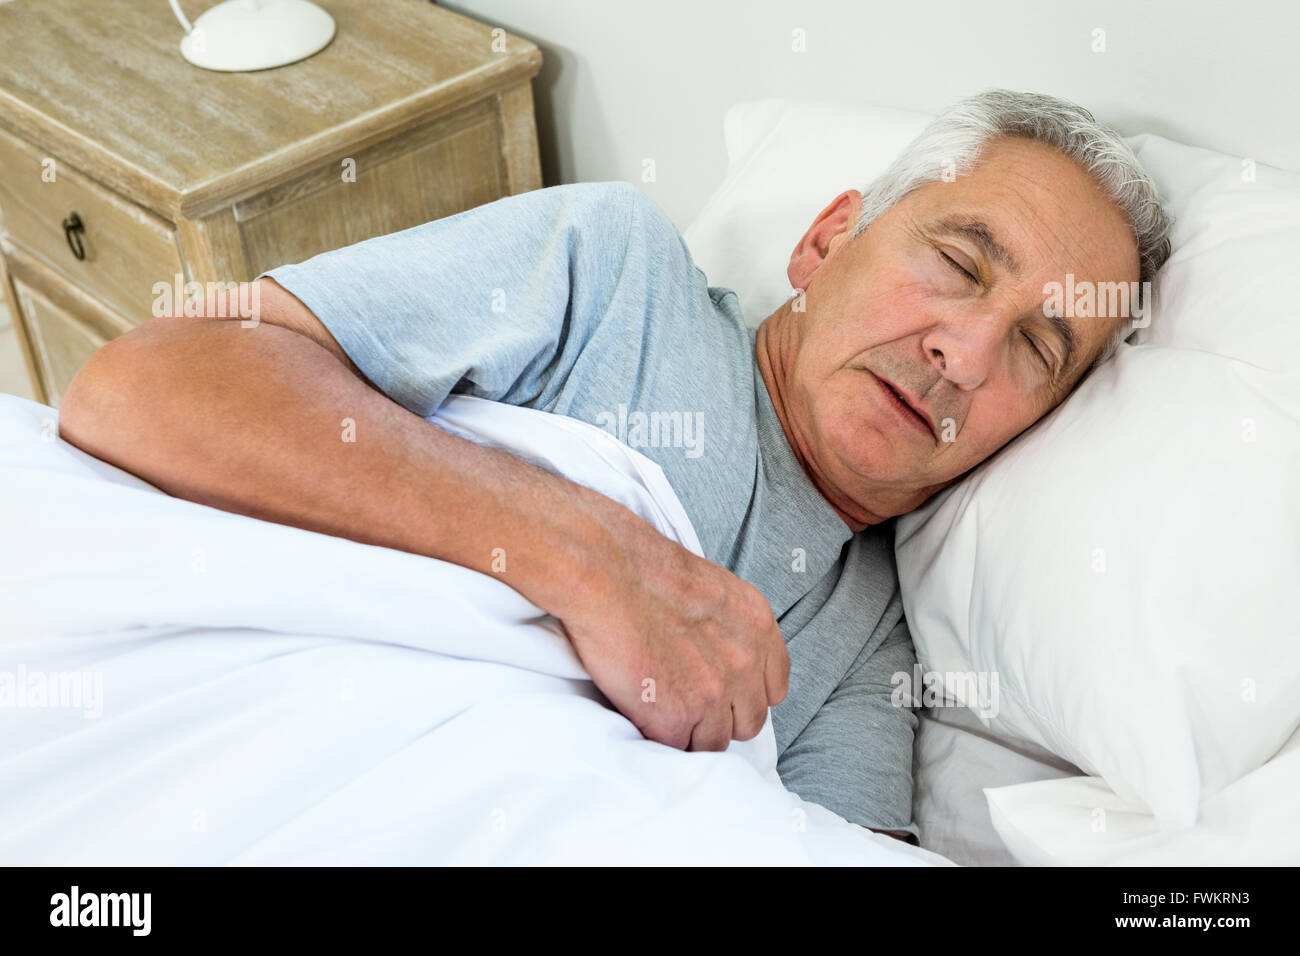 Old Man Asleep High Resolution Stock Photography and Images - Alamy